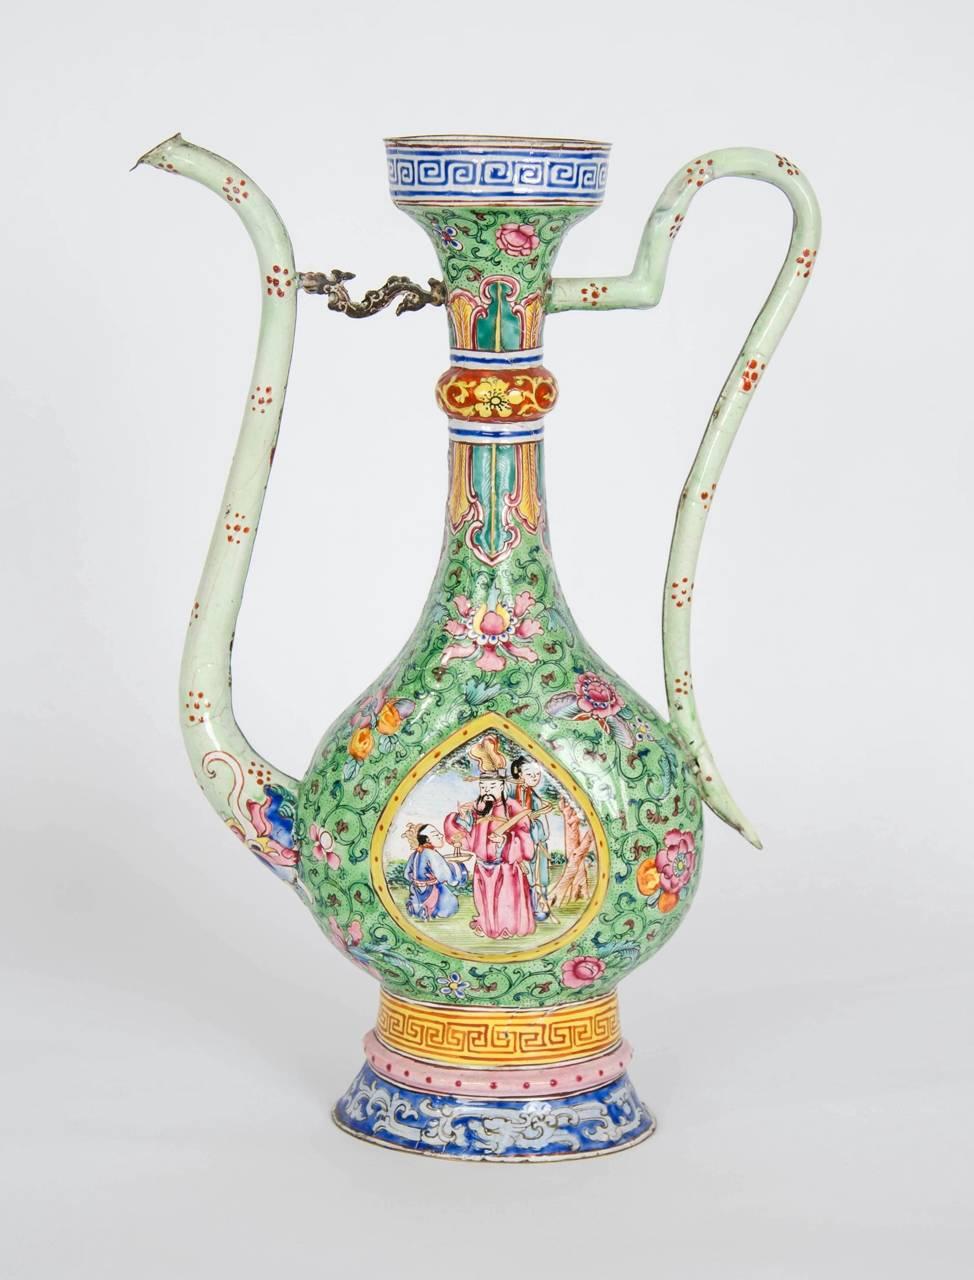 These beautiful jugs date from the late 18th century in China, yet they have been enameled to appear as if they are Persian. They have long, slender bodies in a flattened pear shape, and they feature enamel relief vignettes depicting Chinese